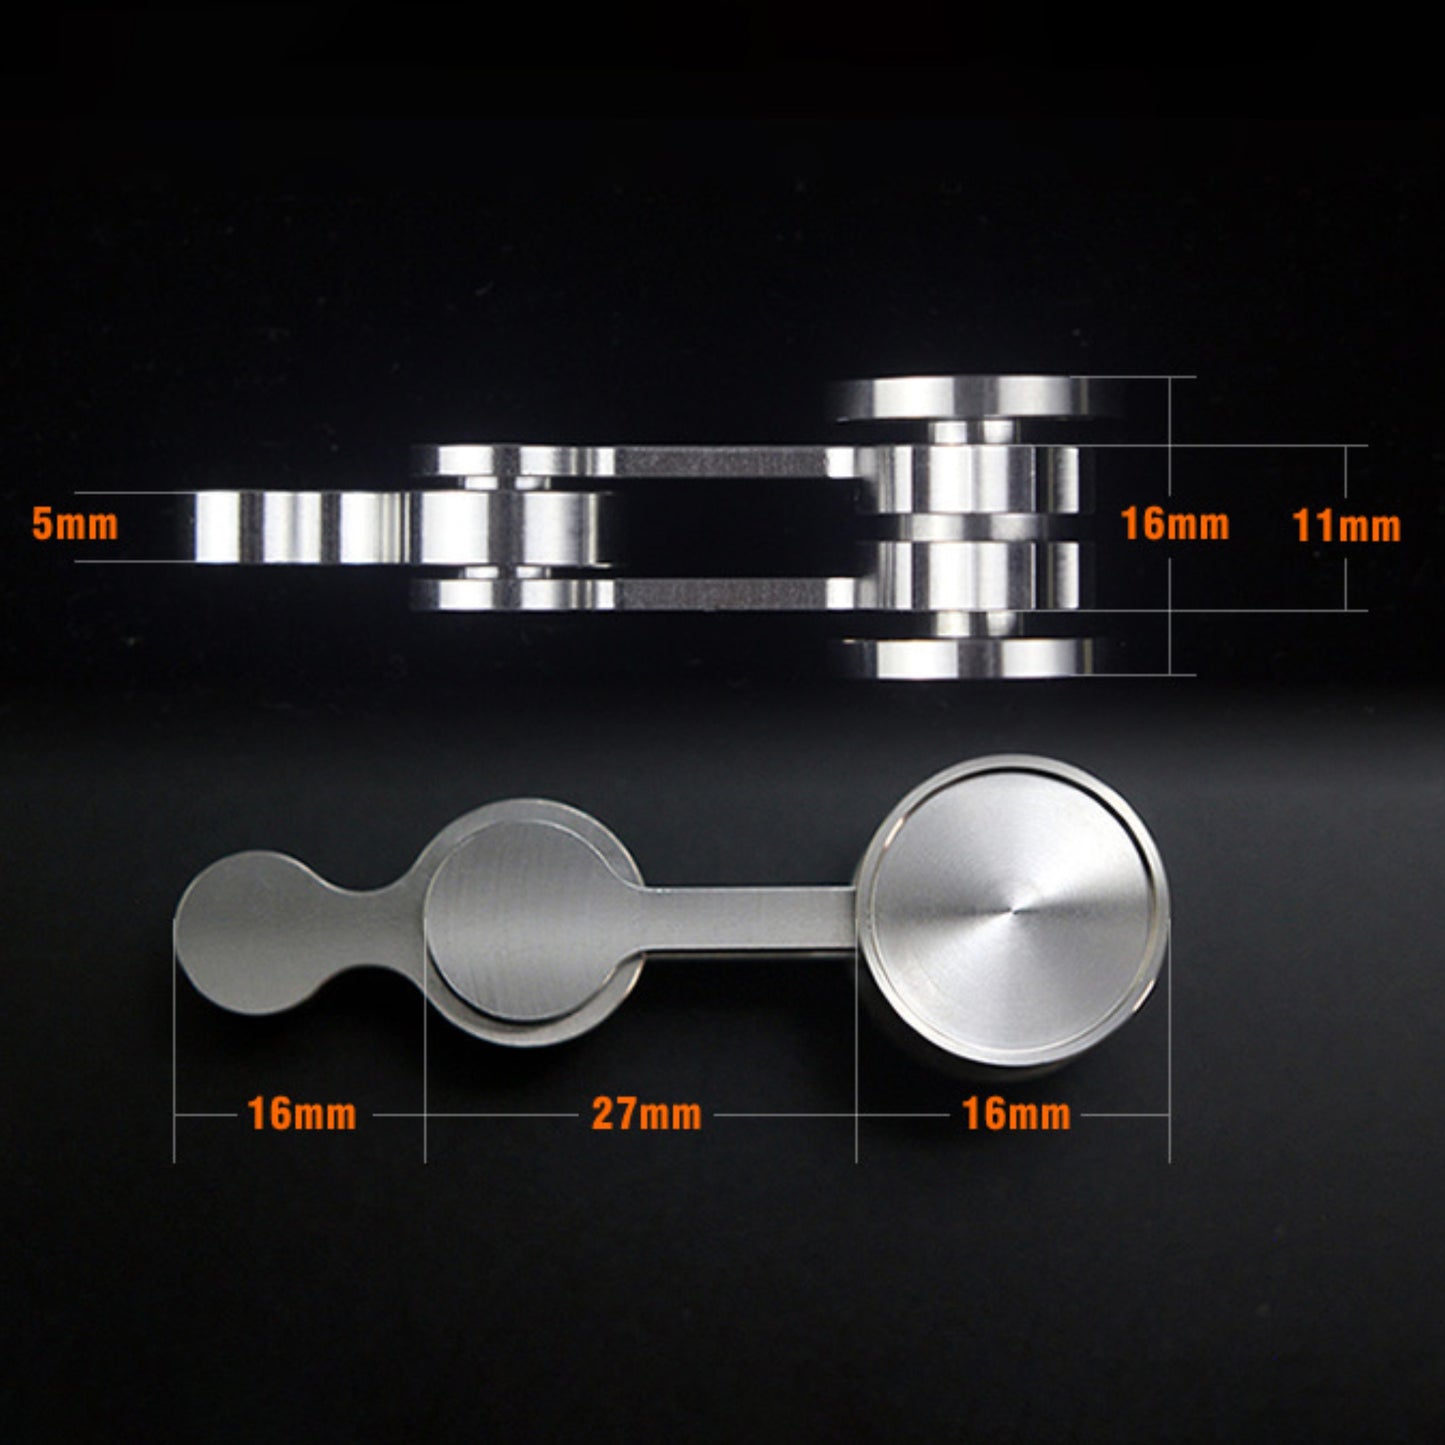 Stainless Steel Anti-Anxiety Stress Relief Fidget Spinner Hand Toy